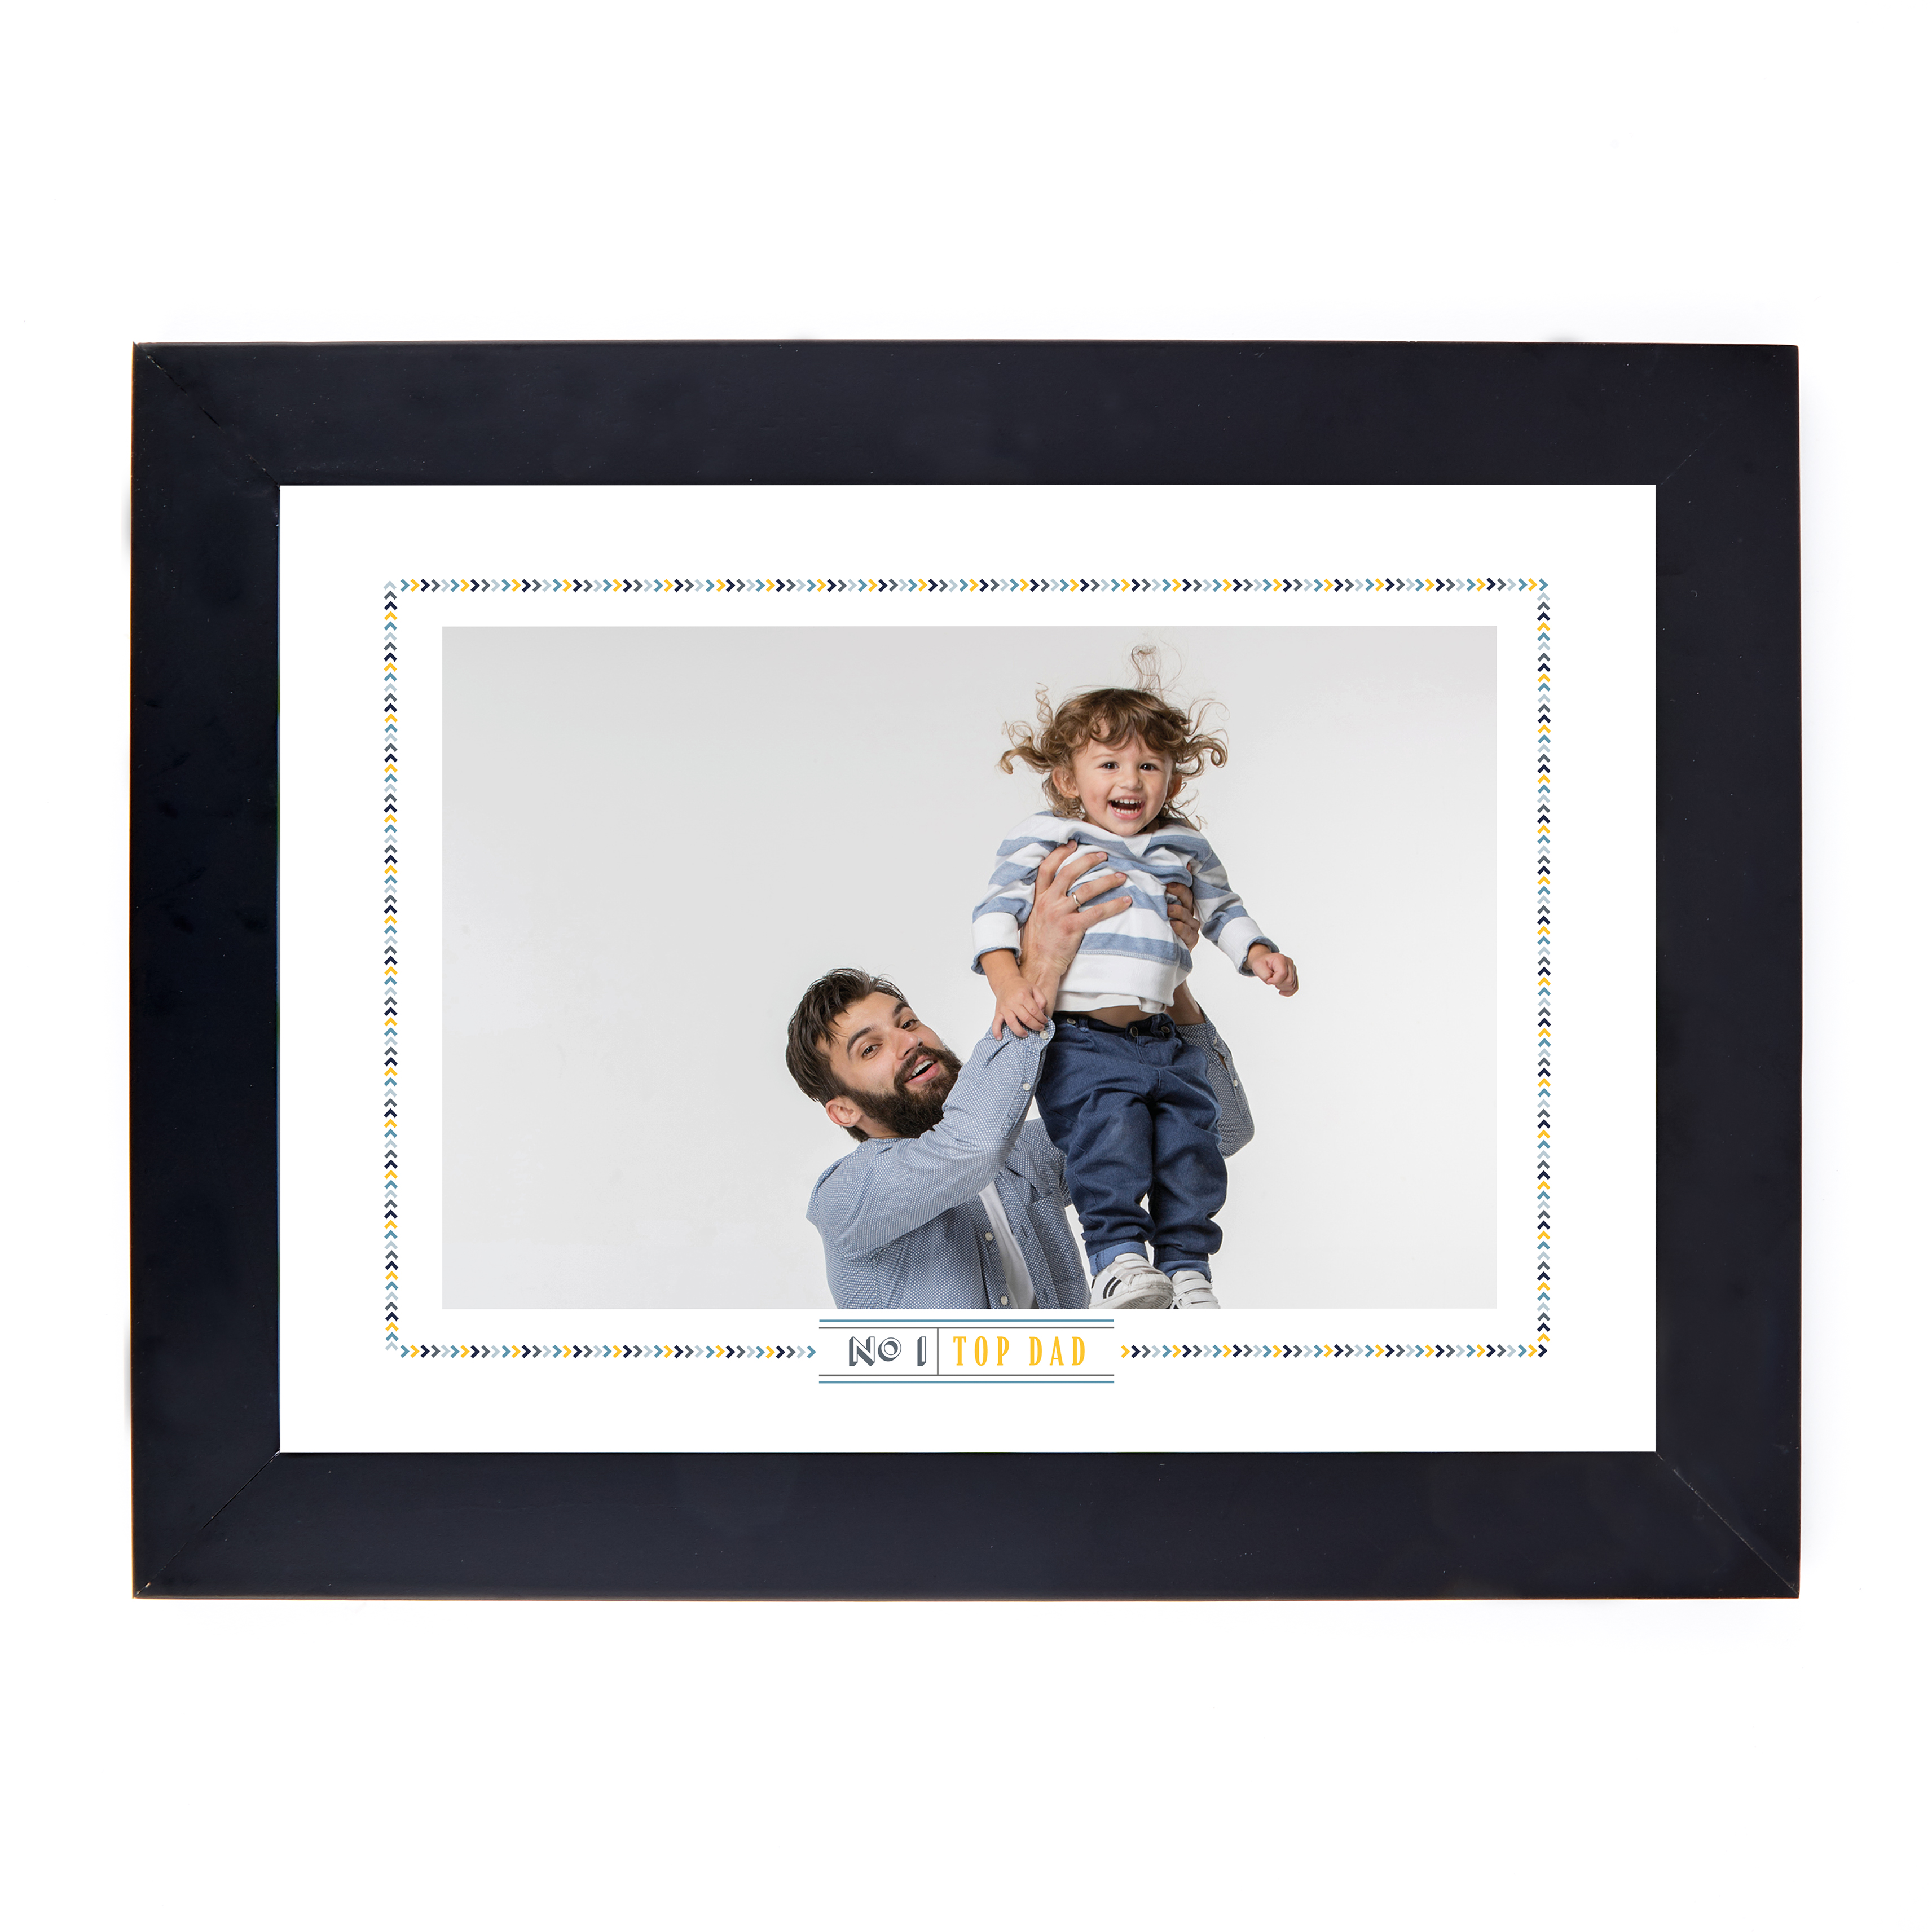 Personalised Father's Day Photo Print - No 1, Top Dad